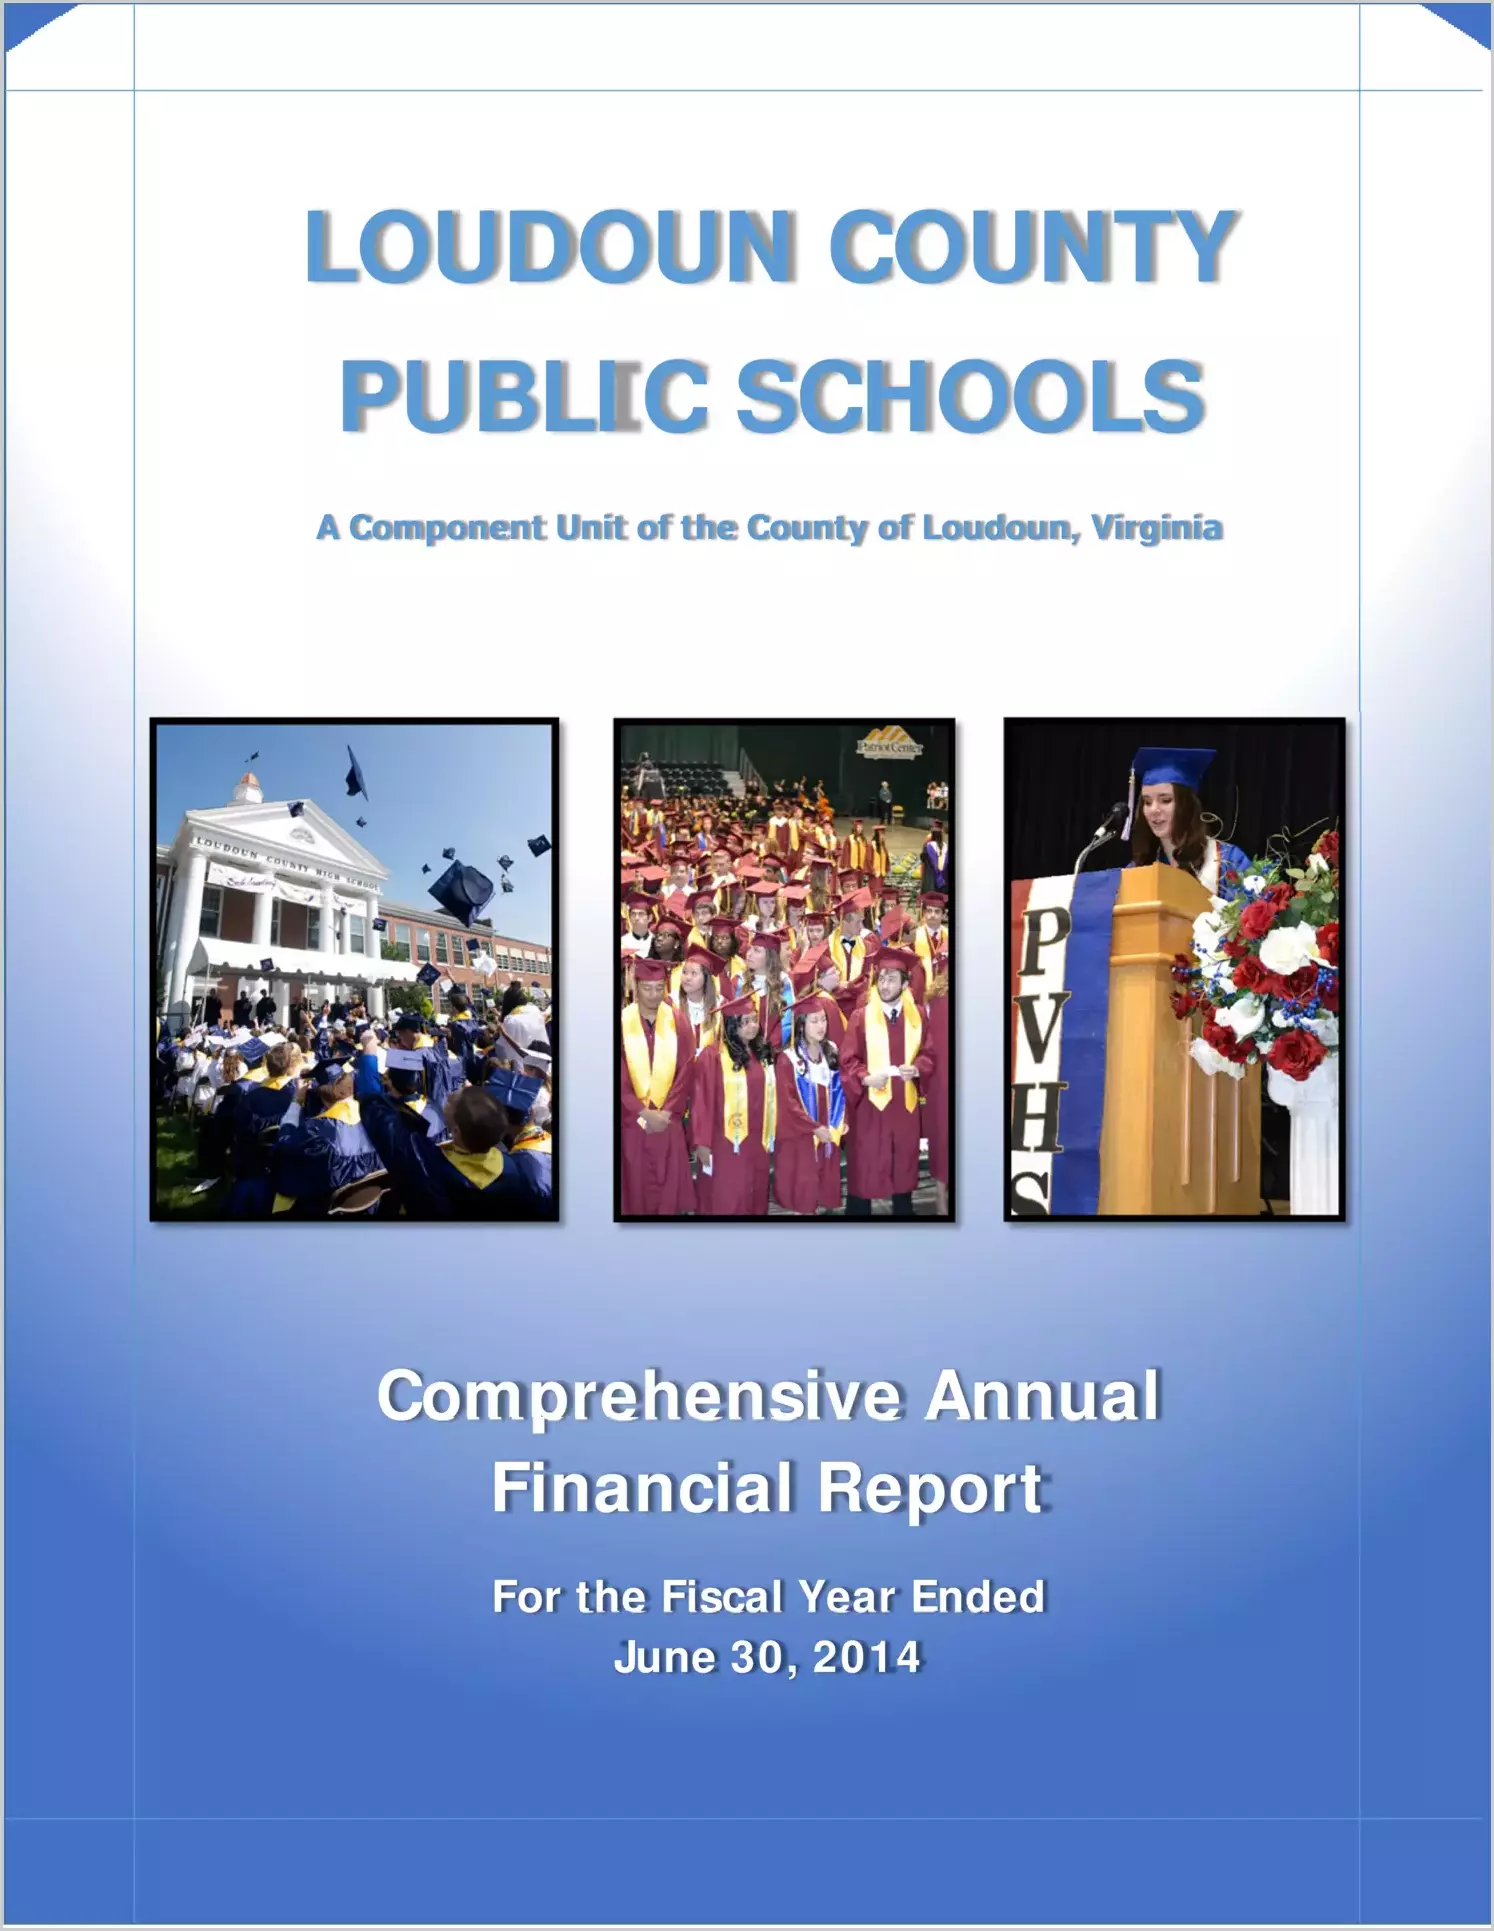 2014 Public Schools Annual Financial Report for County of Loudoun